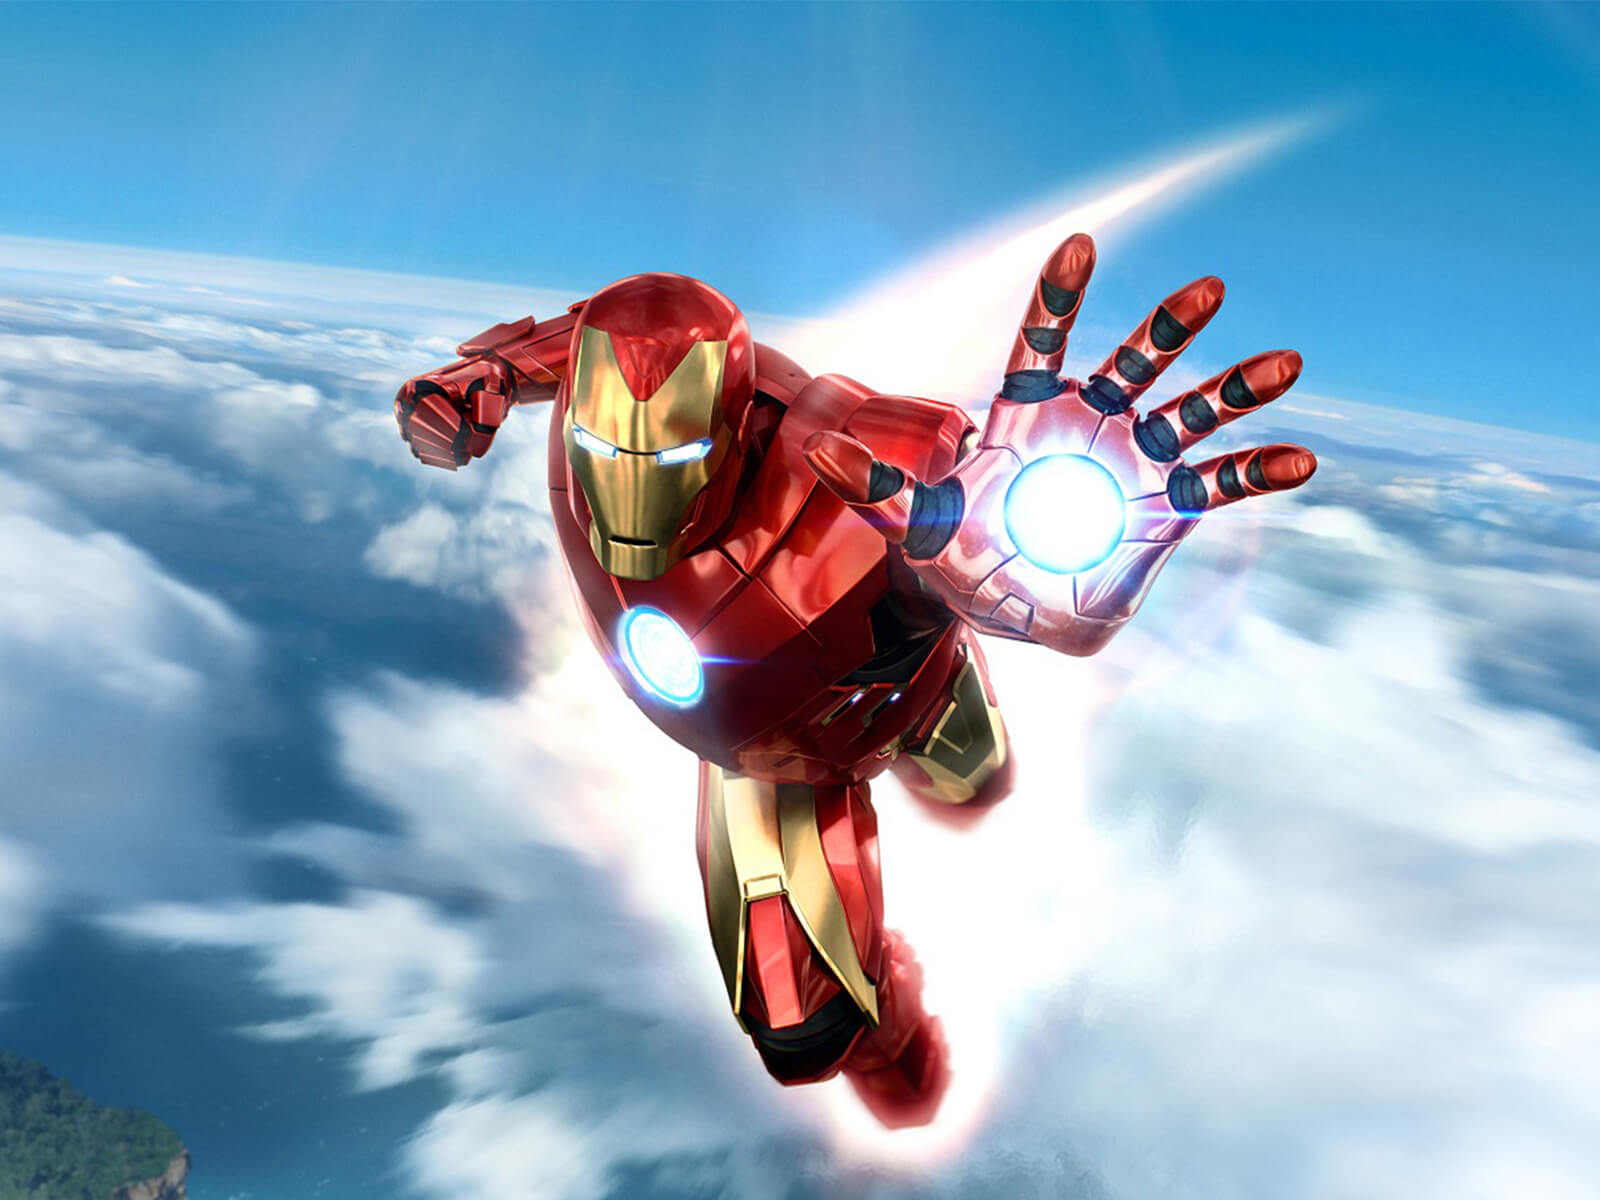 Iron Man flies through the sky with his fist at the ready.